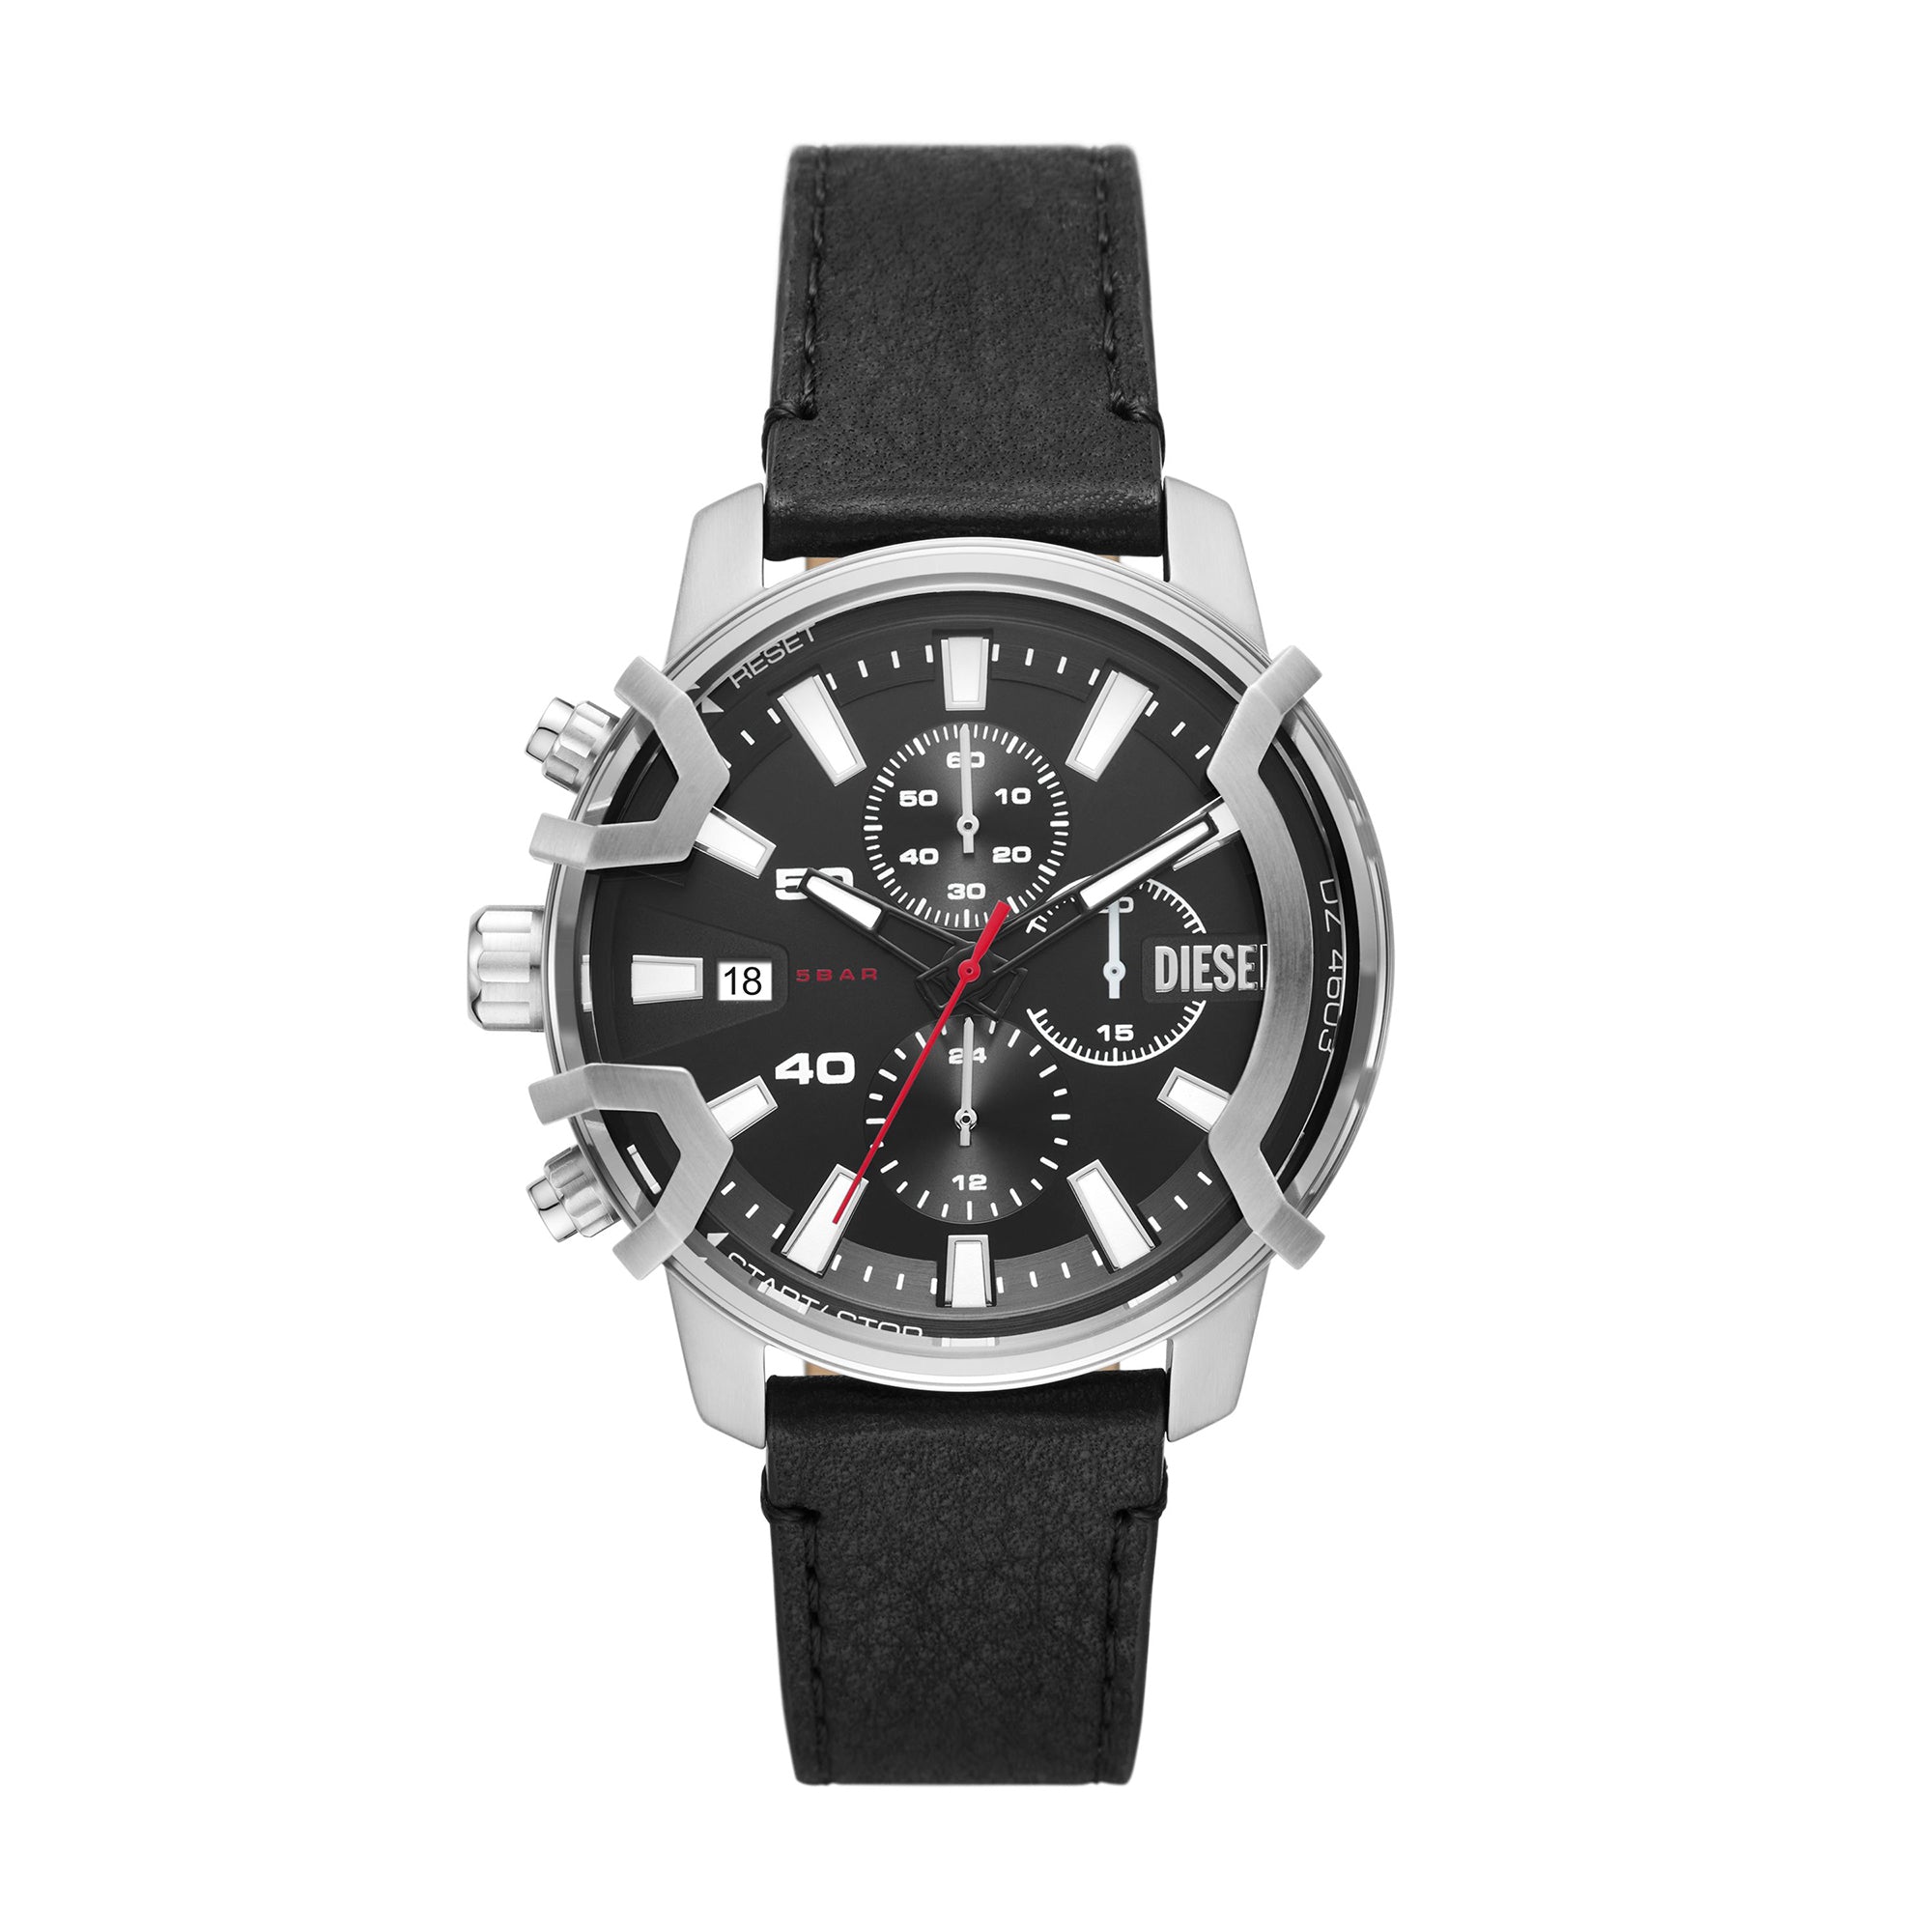 DIESEL CLASSIC GRIFFED WATCHGRIFFED House DIESEL BLACK M – The Watch LEATHER CHRONOGRAPH